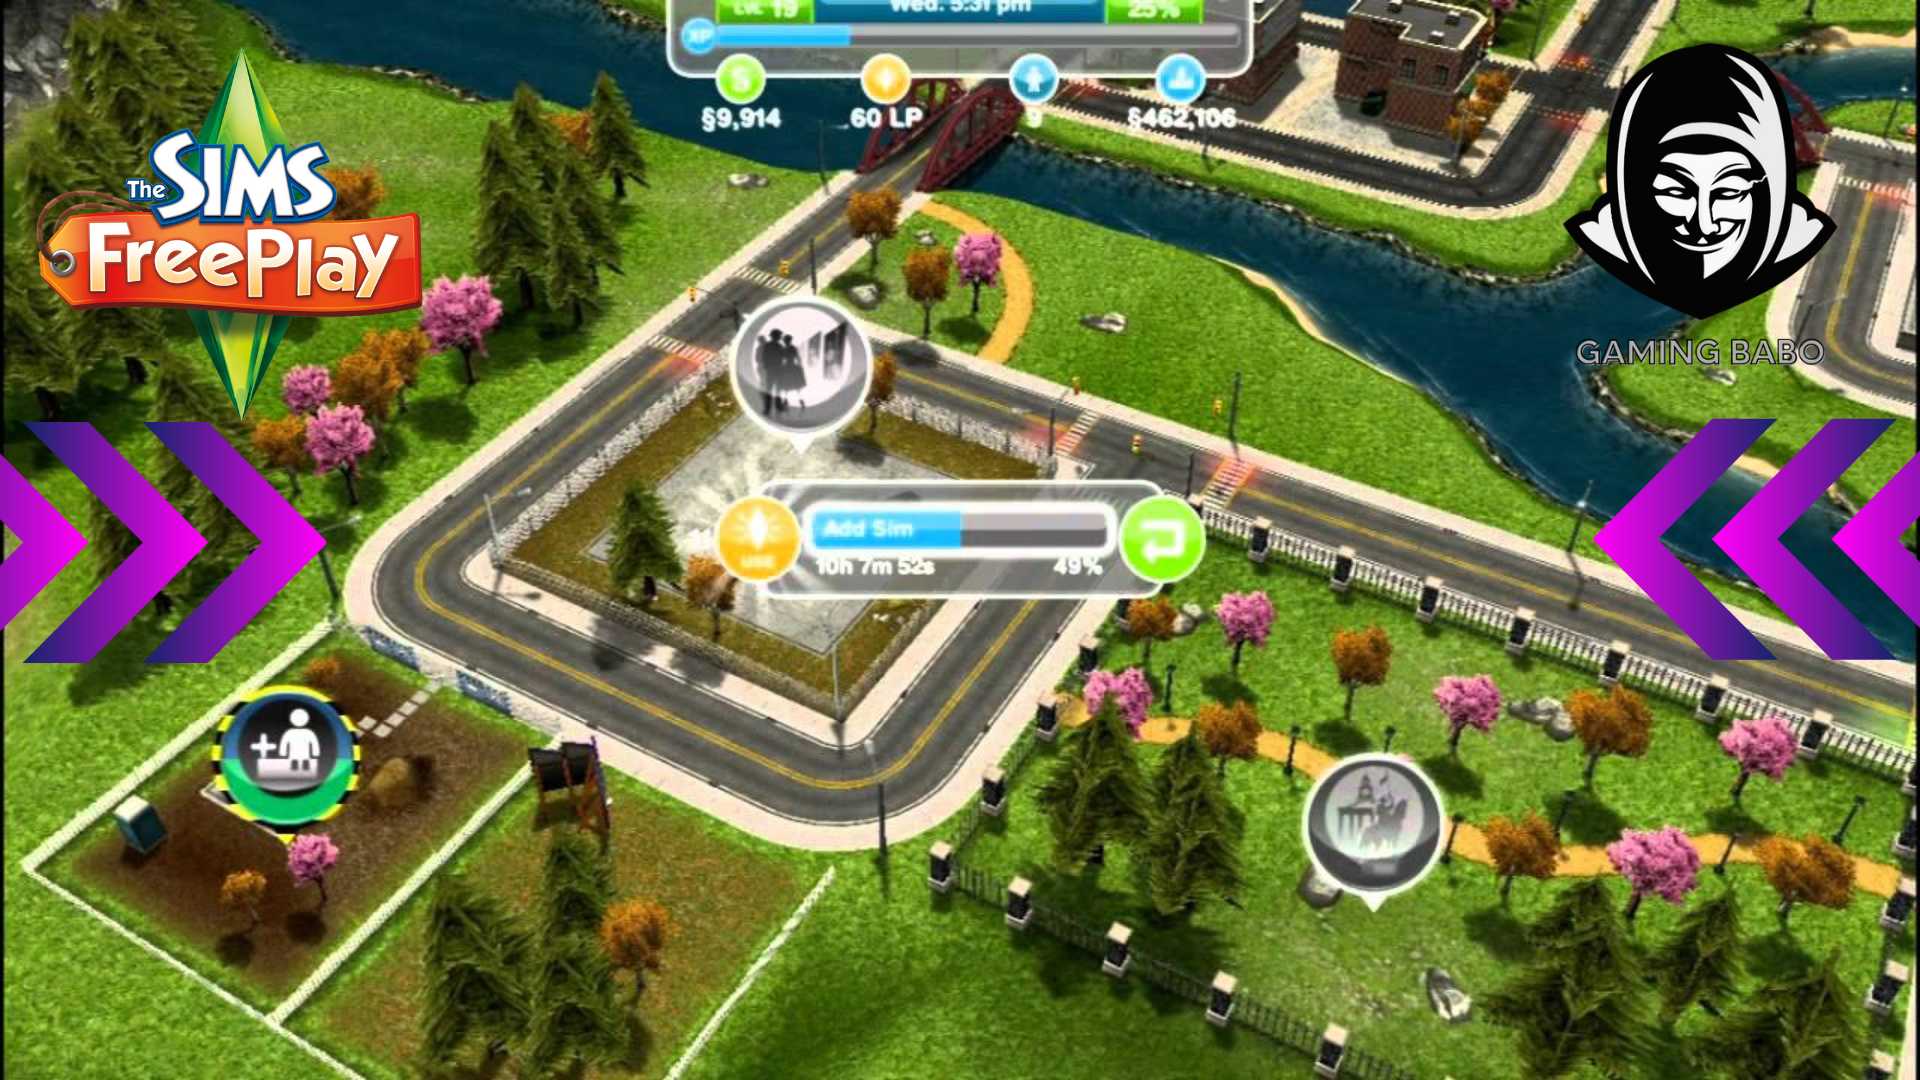 The Sims FreePlay tips and tricks